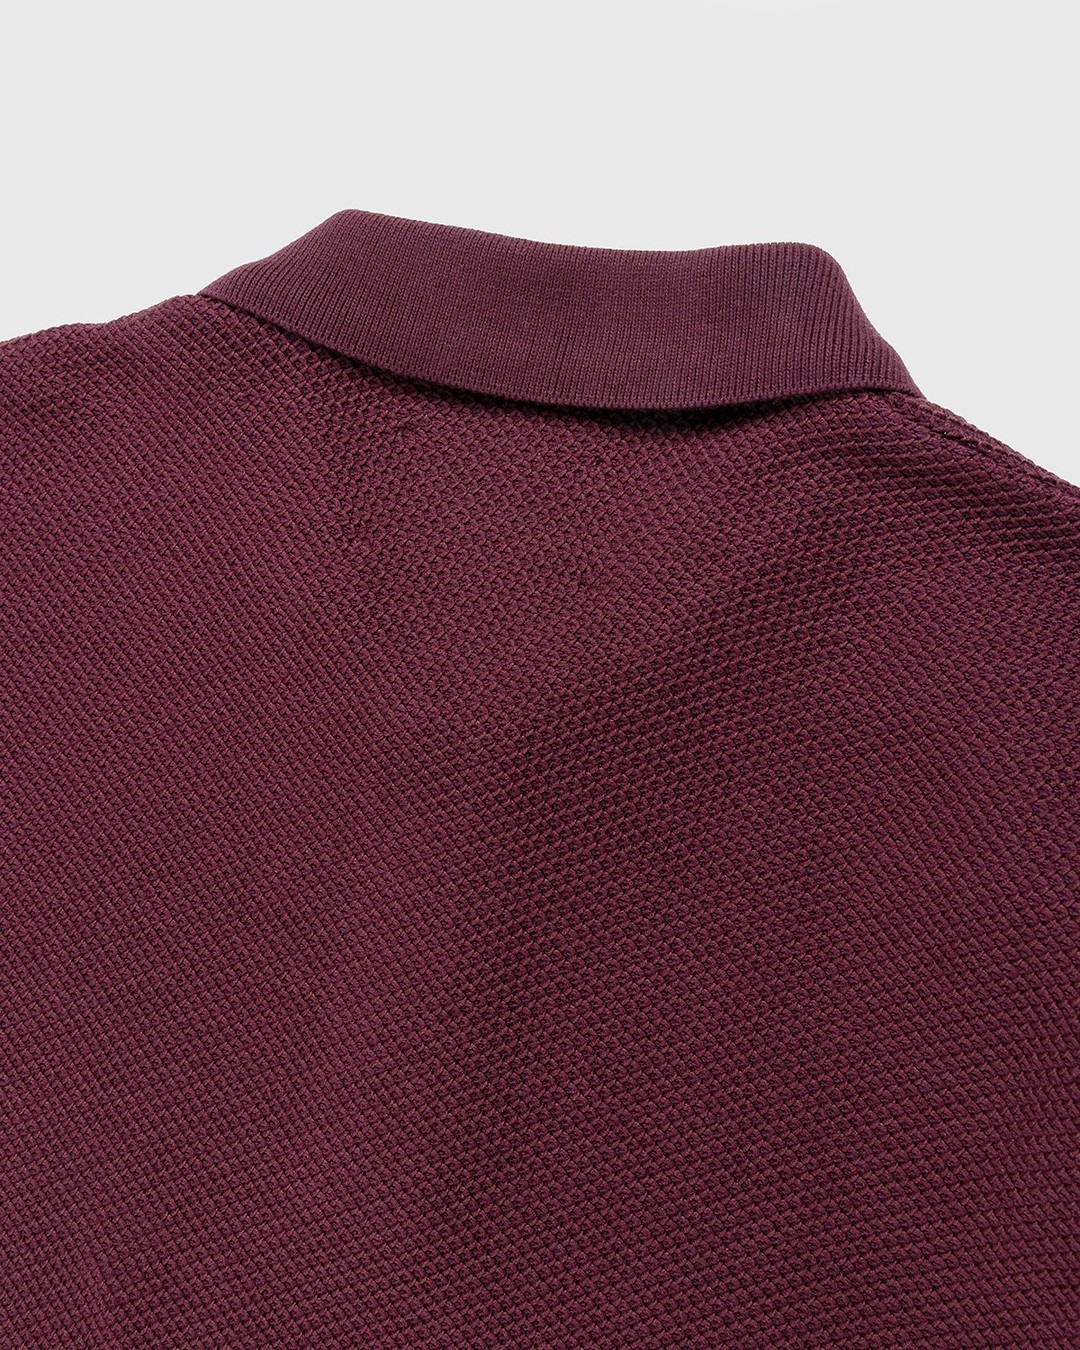 Highsnobiety – Knit Short-Sleeve Polo Bordeaux - Polos - Brown - Image 3